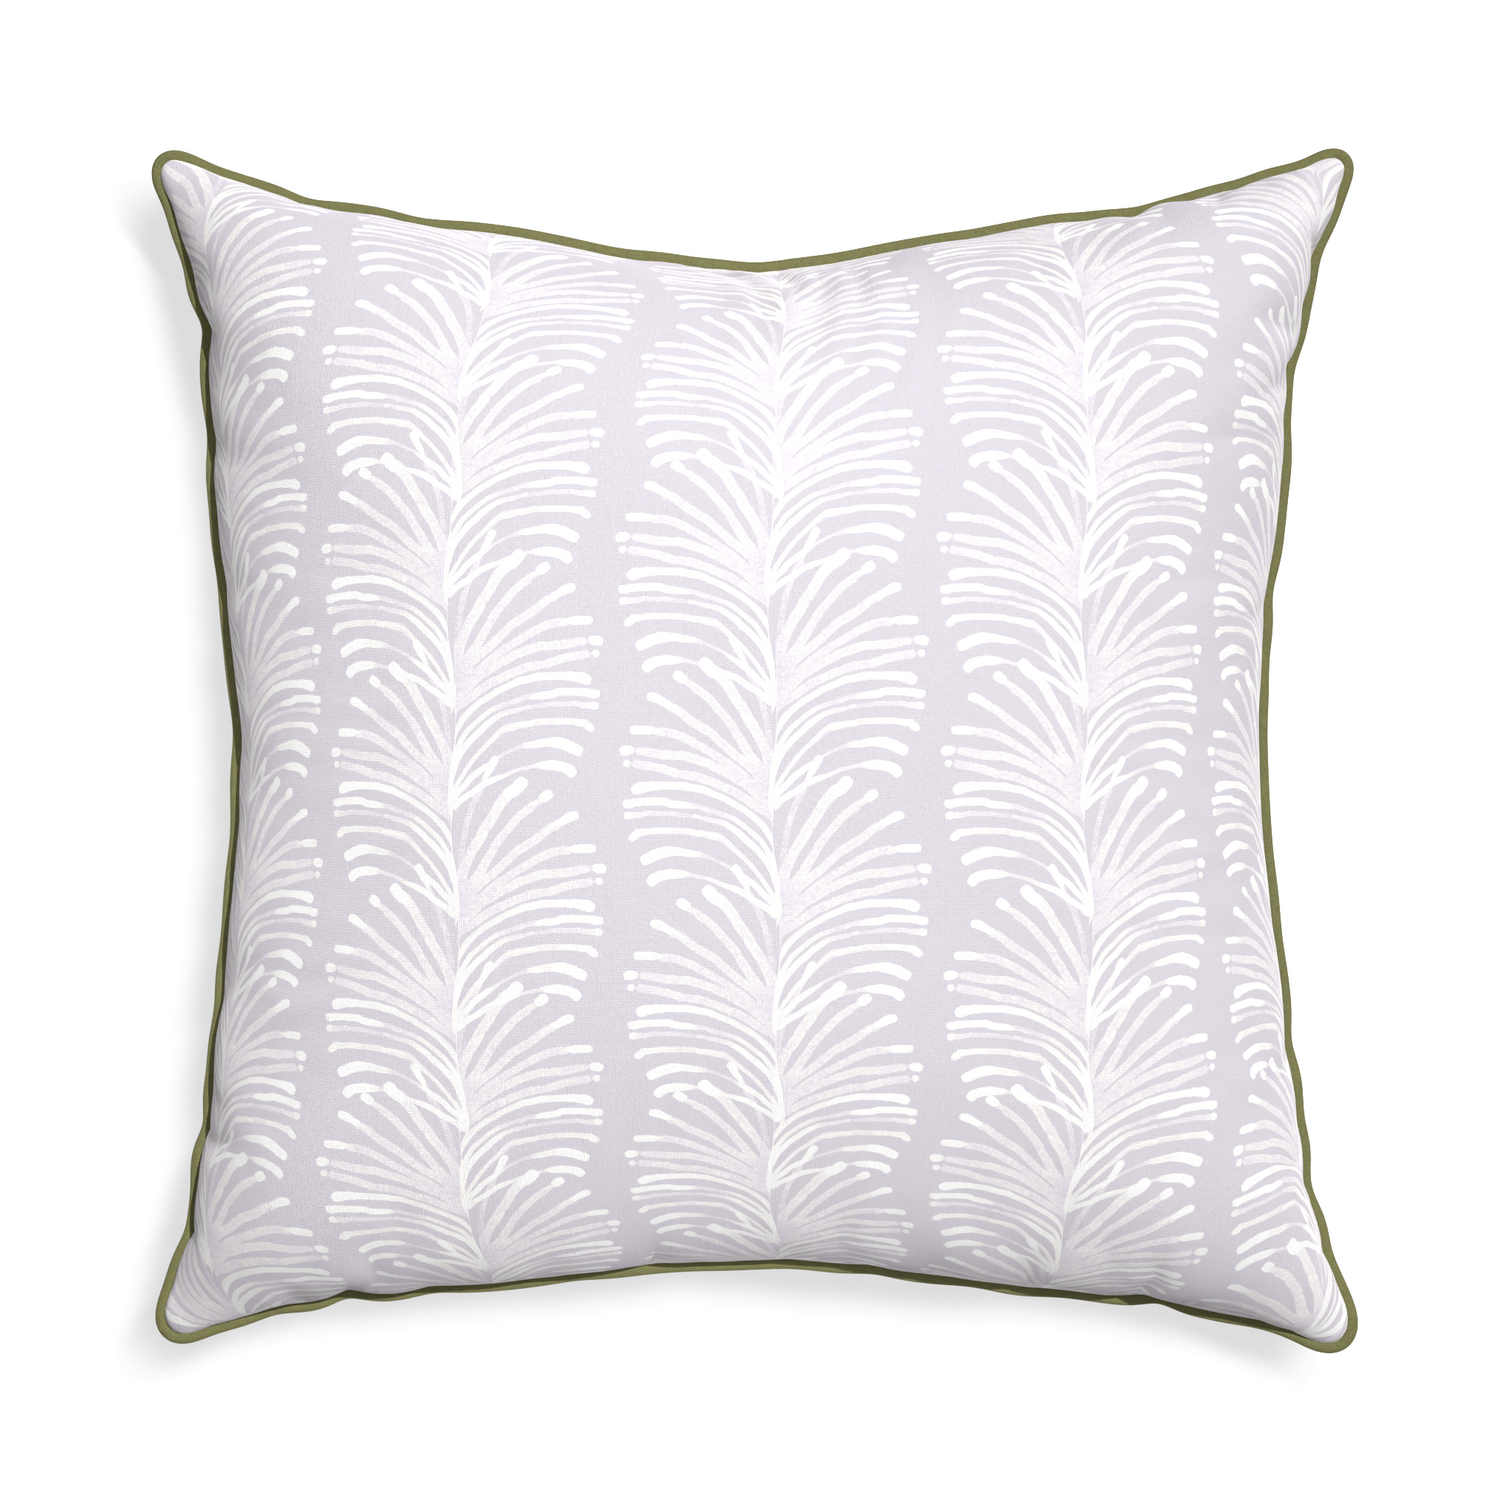 square lavender colored botanical stripe pillow with moss green piping